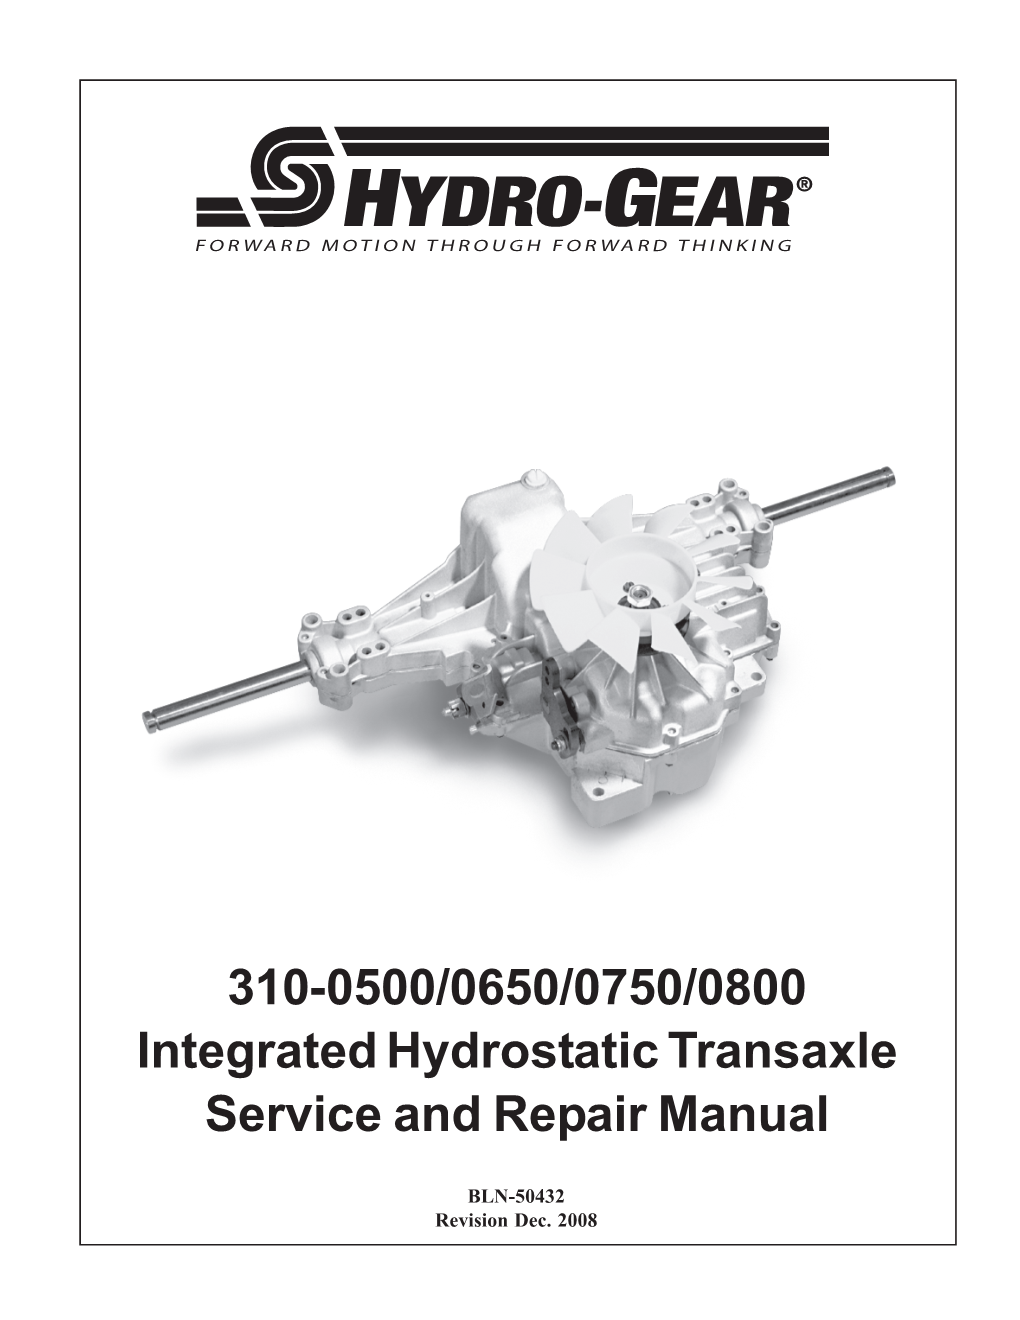 310-0500/0650/0750/0800 Integrated Hydrostatic Transaxle Service and Repair Manual